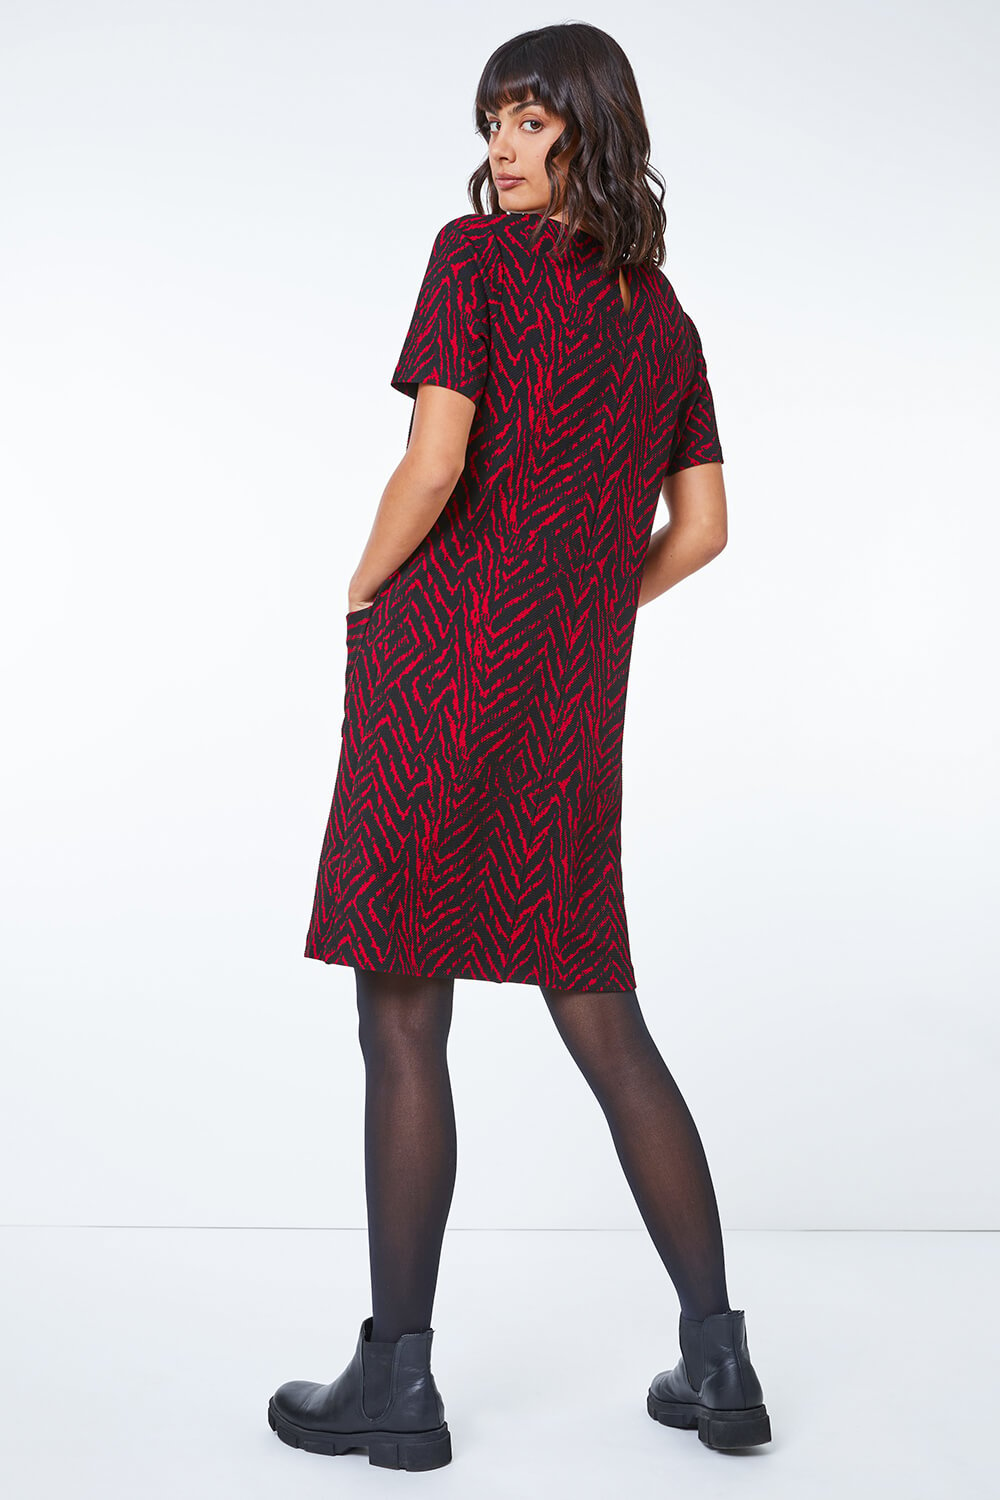 Red Textured Animal Print Stretch Tunic Dress, Image 3 of 5